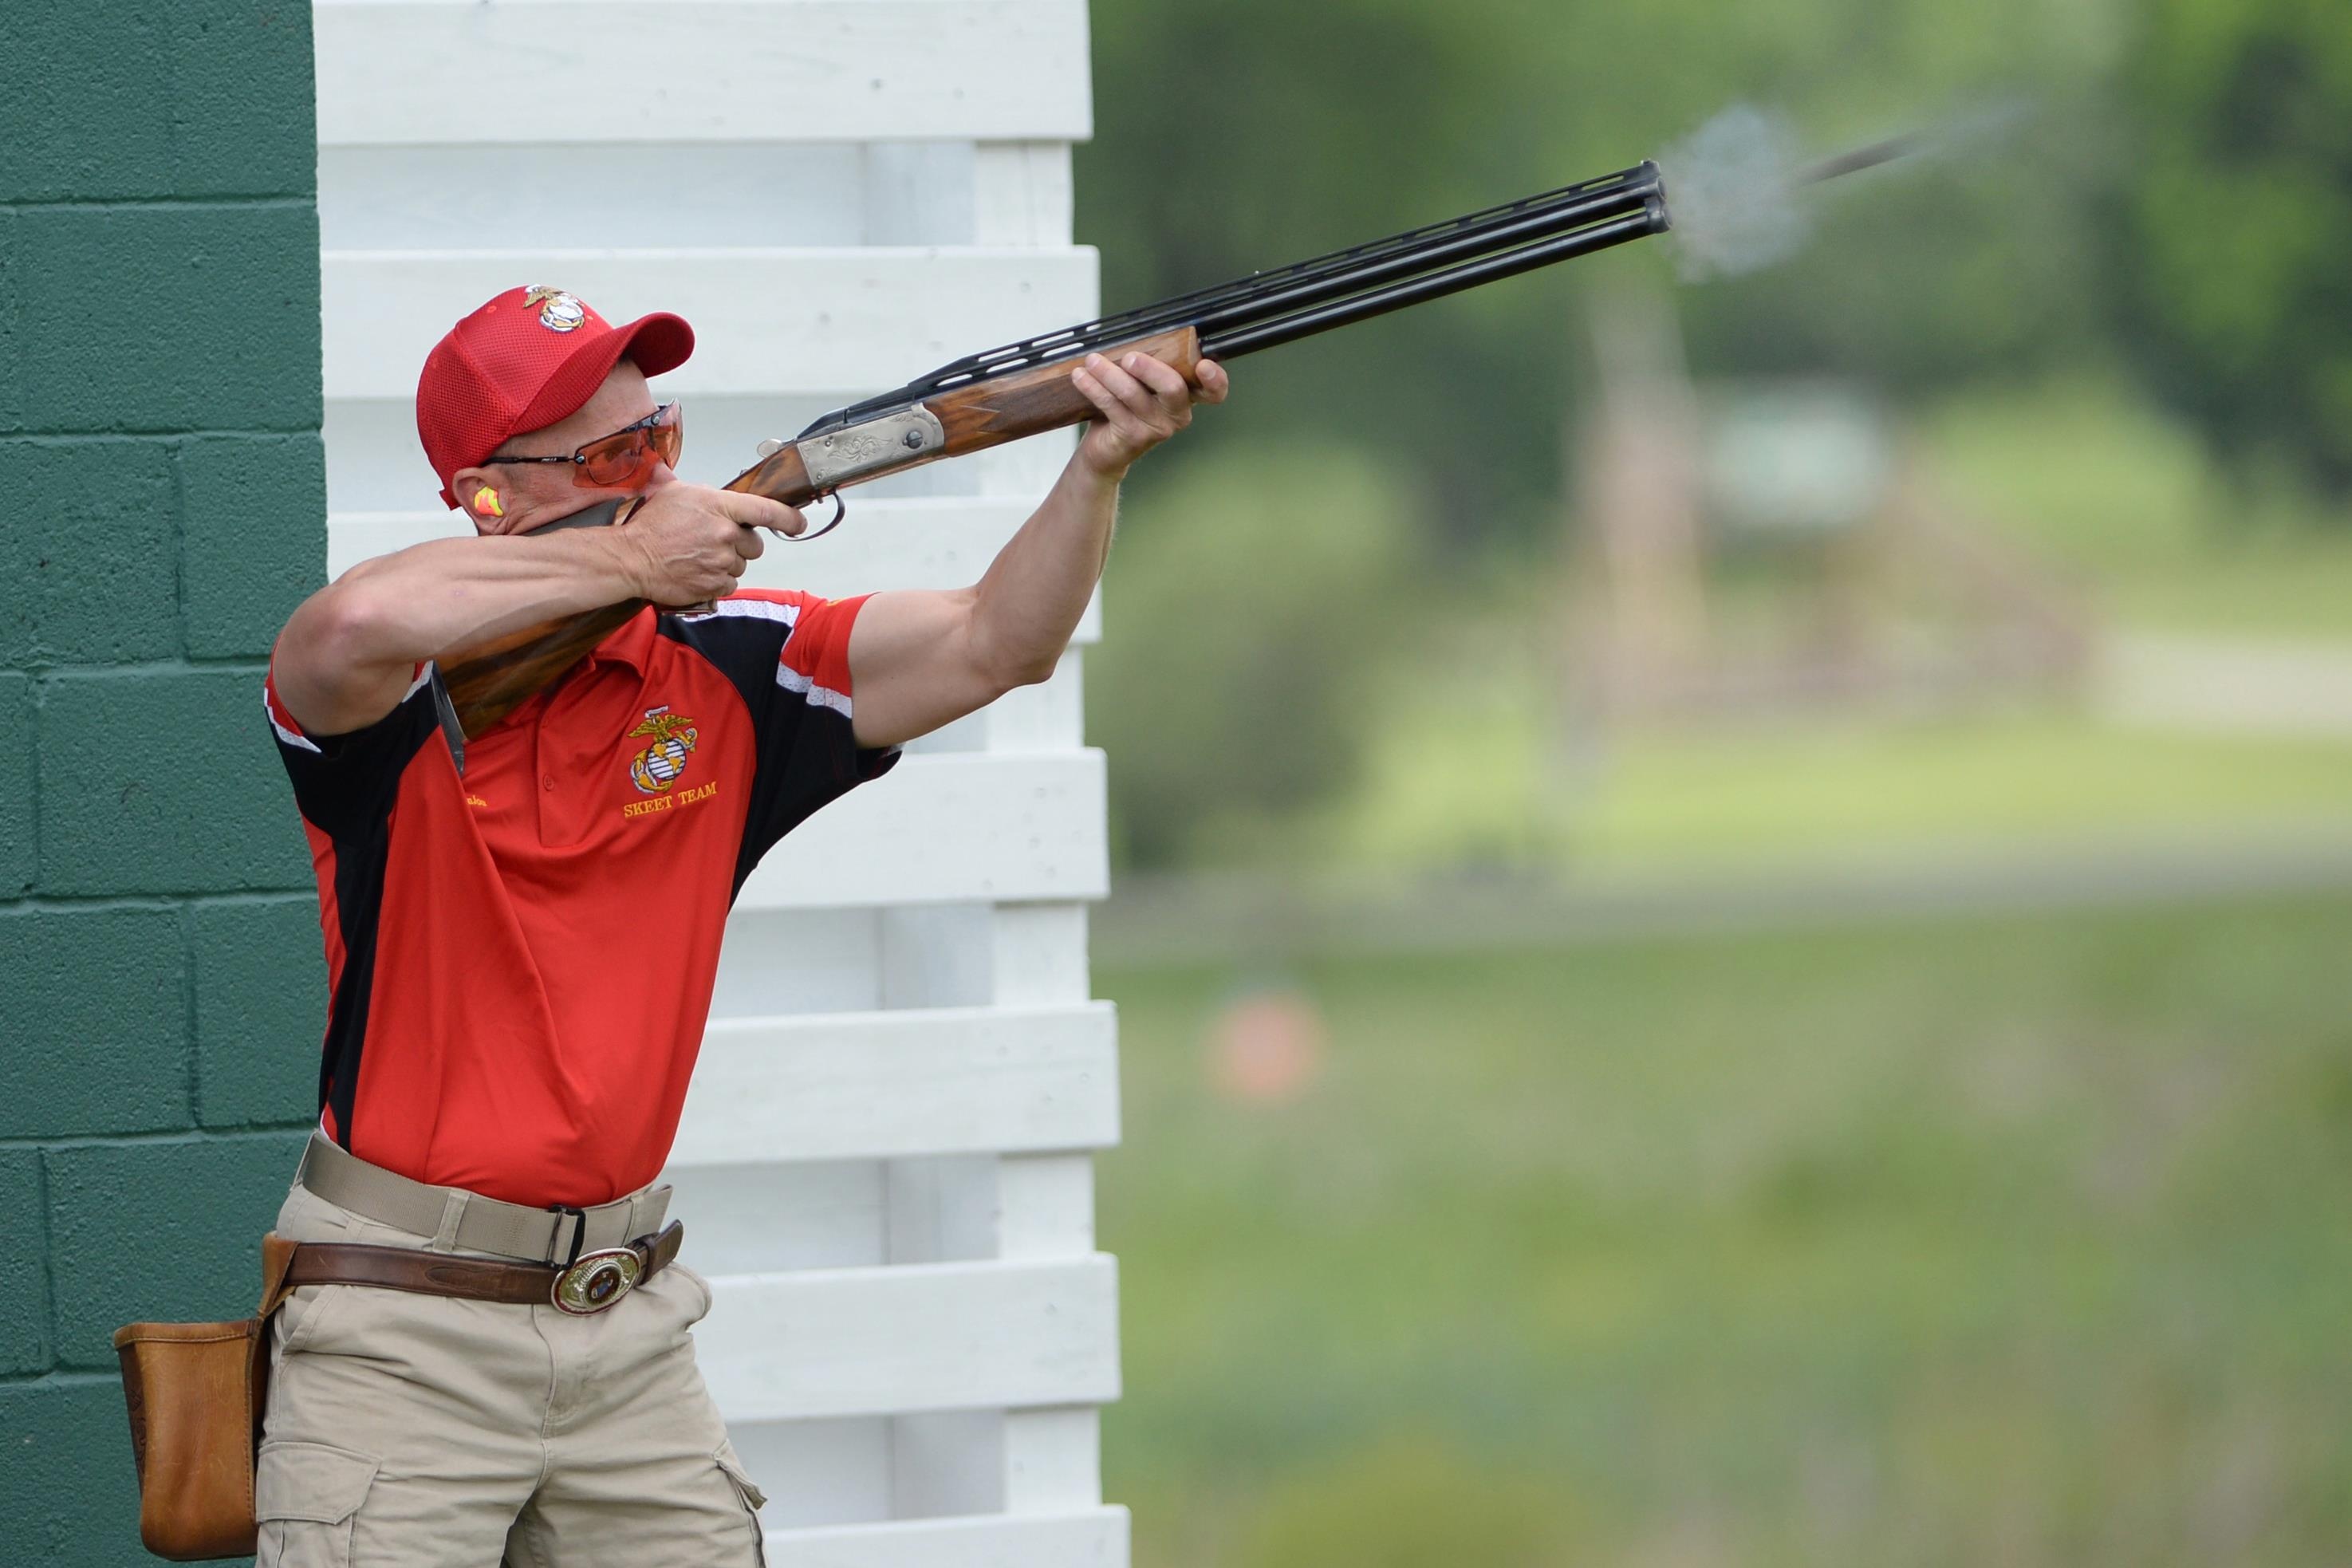 Skeet Shooting: Marine Corps Chief Warrant Officer 4 Scott Danjou shoots during the 2016 Armed Services Skeet Championships. 2950x1970 HD Wallpaper.